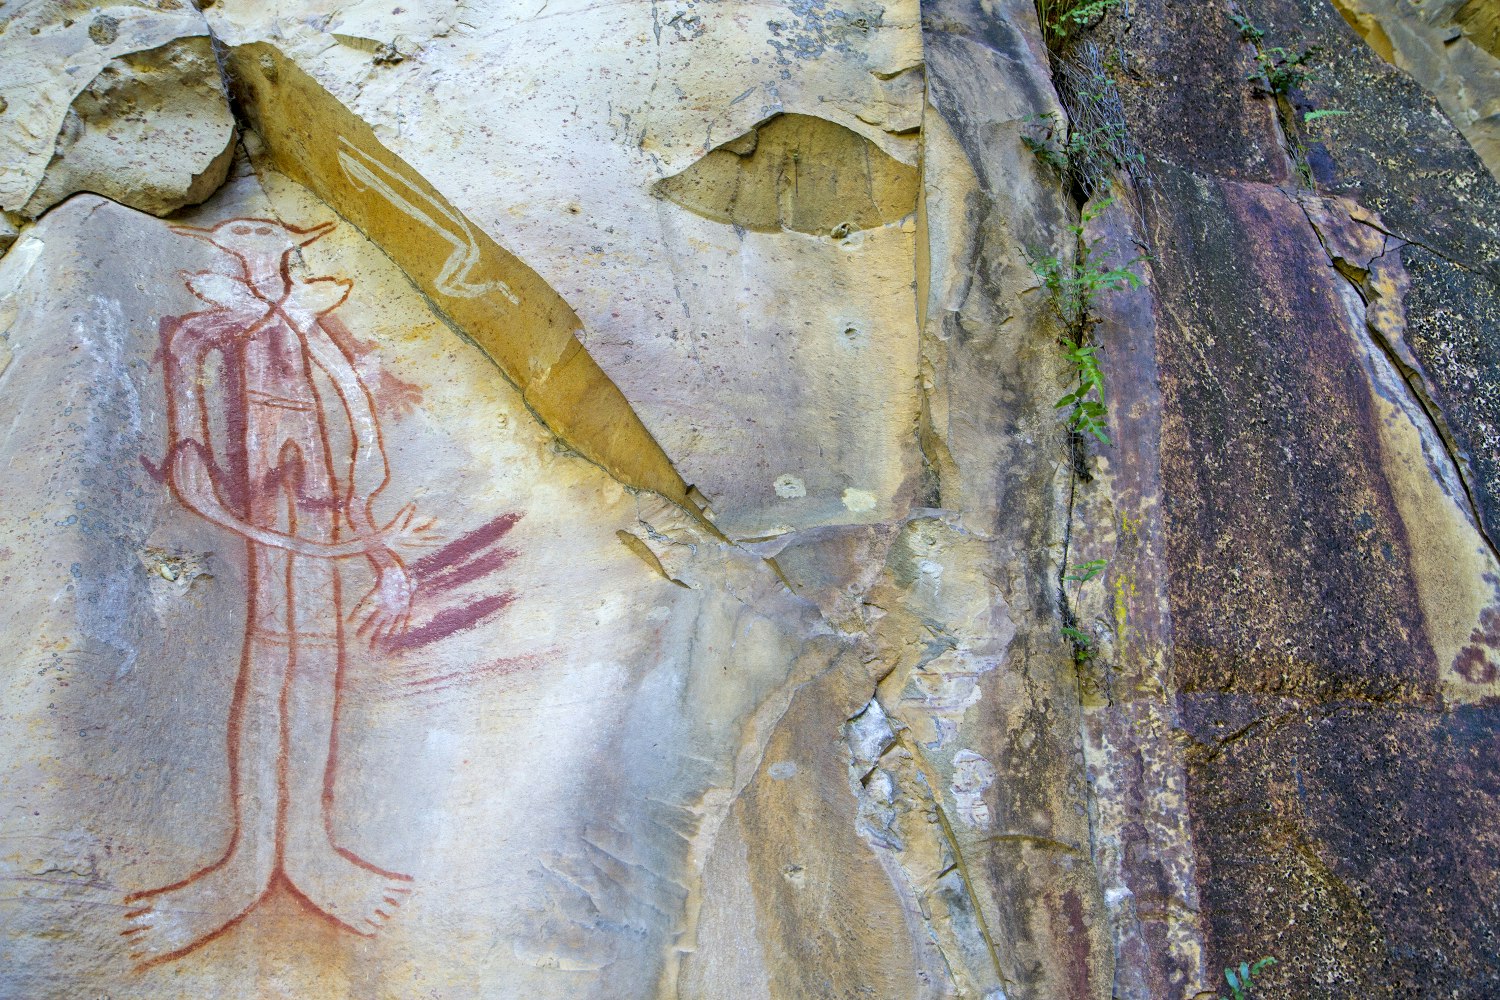 Rock art in the Jatbula Amphitheatre. Image by Andrew Bain / Lonely Planet